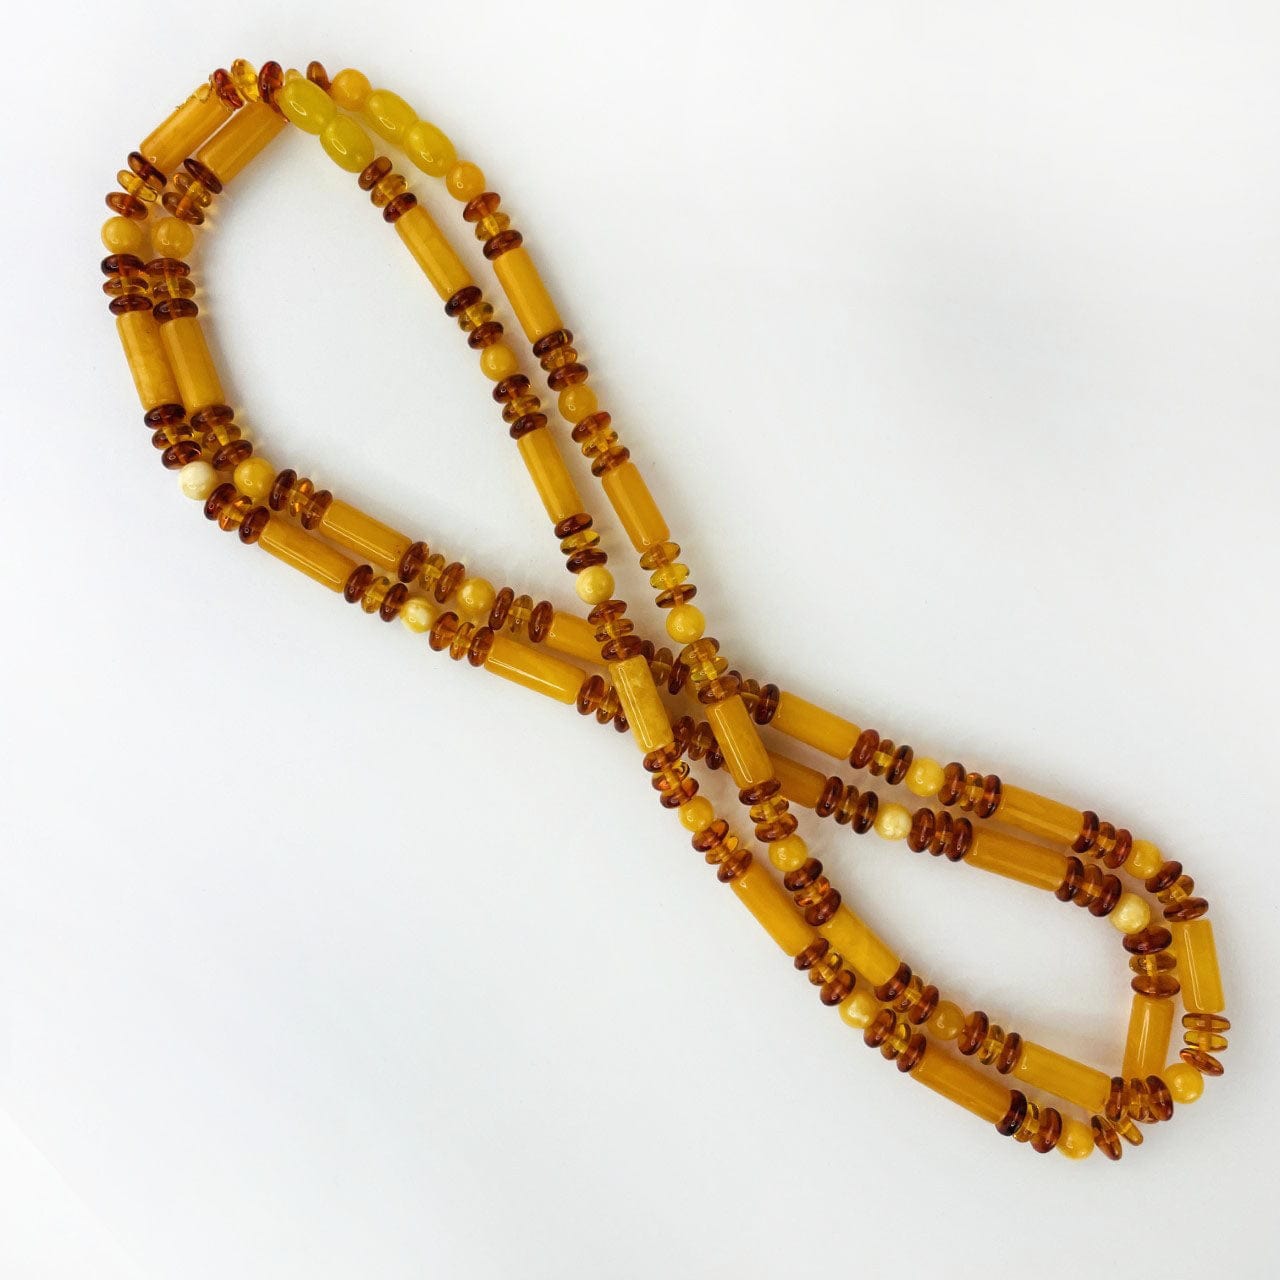 2 Amber Beaded Necklaces with Assorted Beads